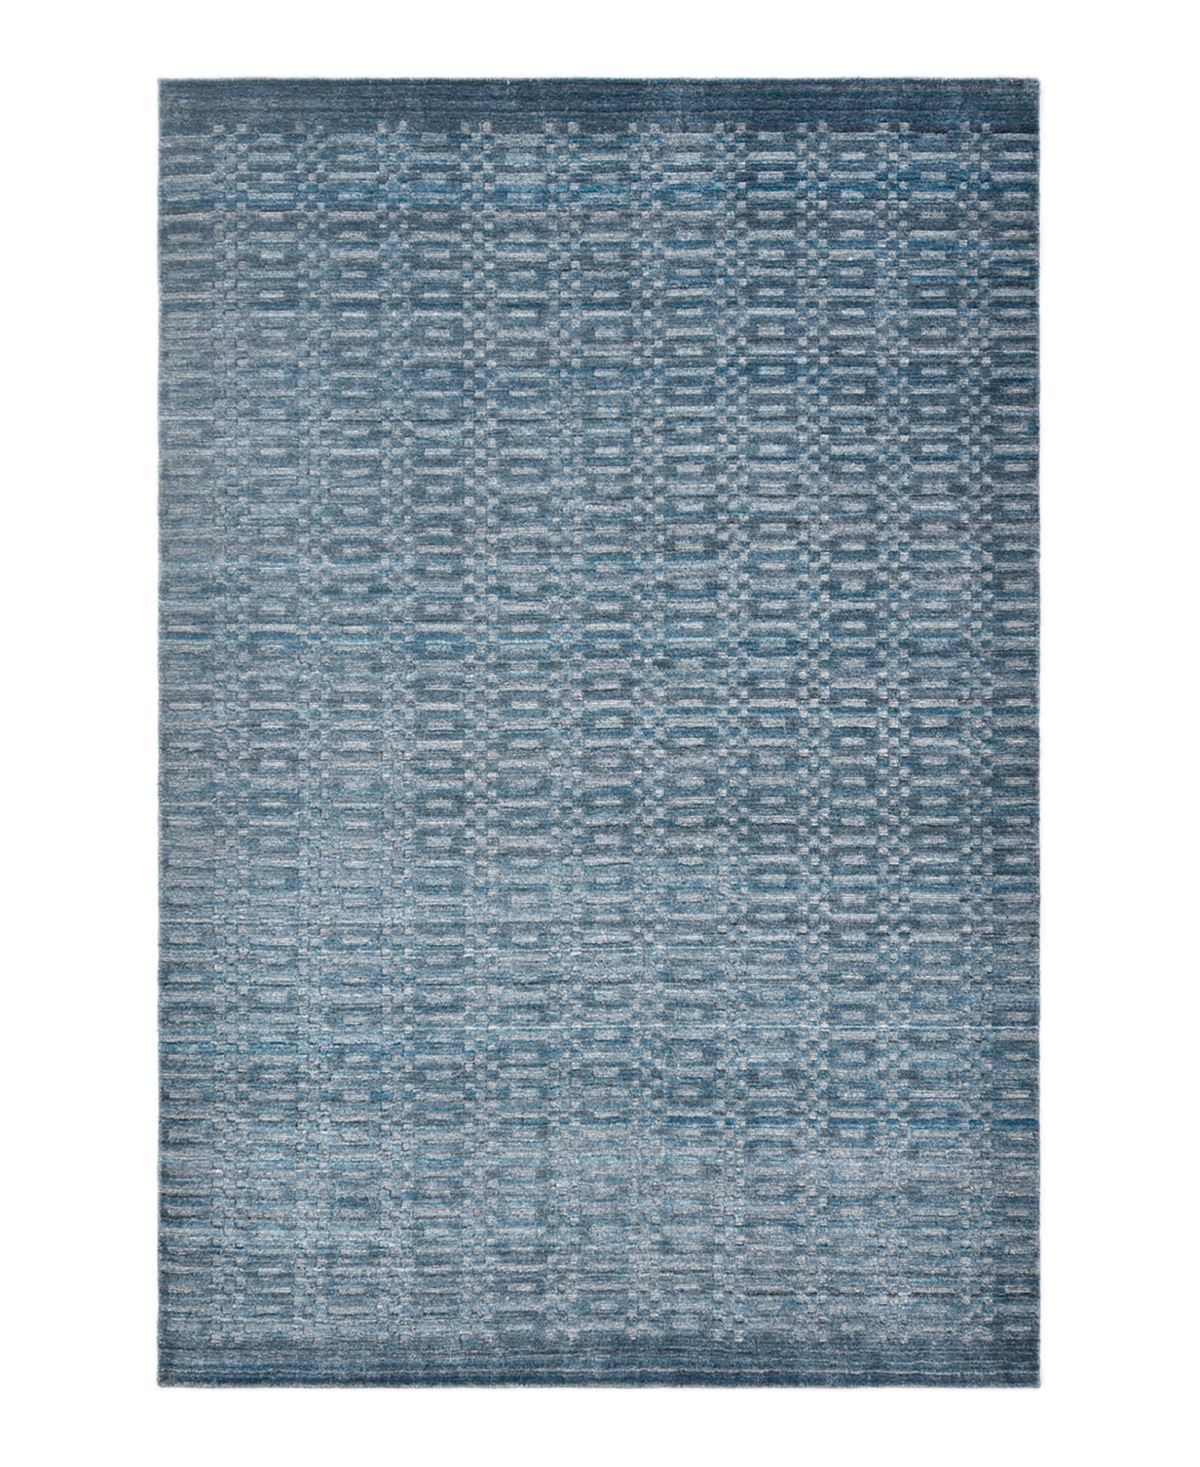 Timeless Rug Designs Michelle S3226 5' x 8' Area Rug - Blue